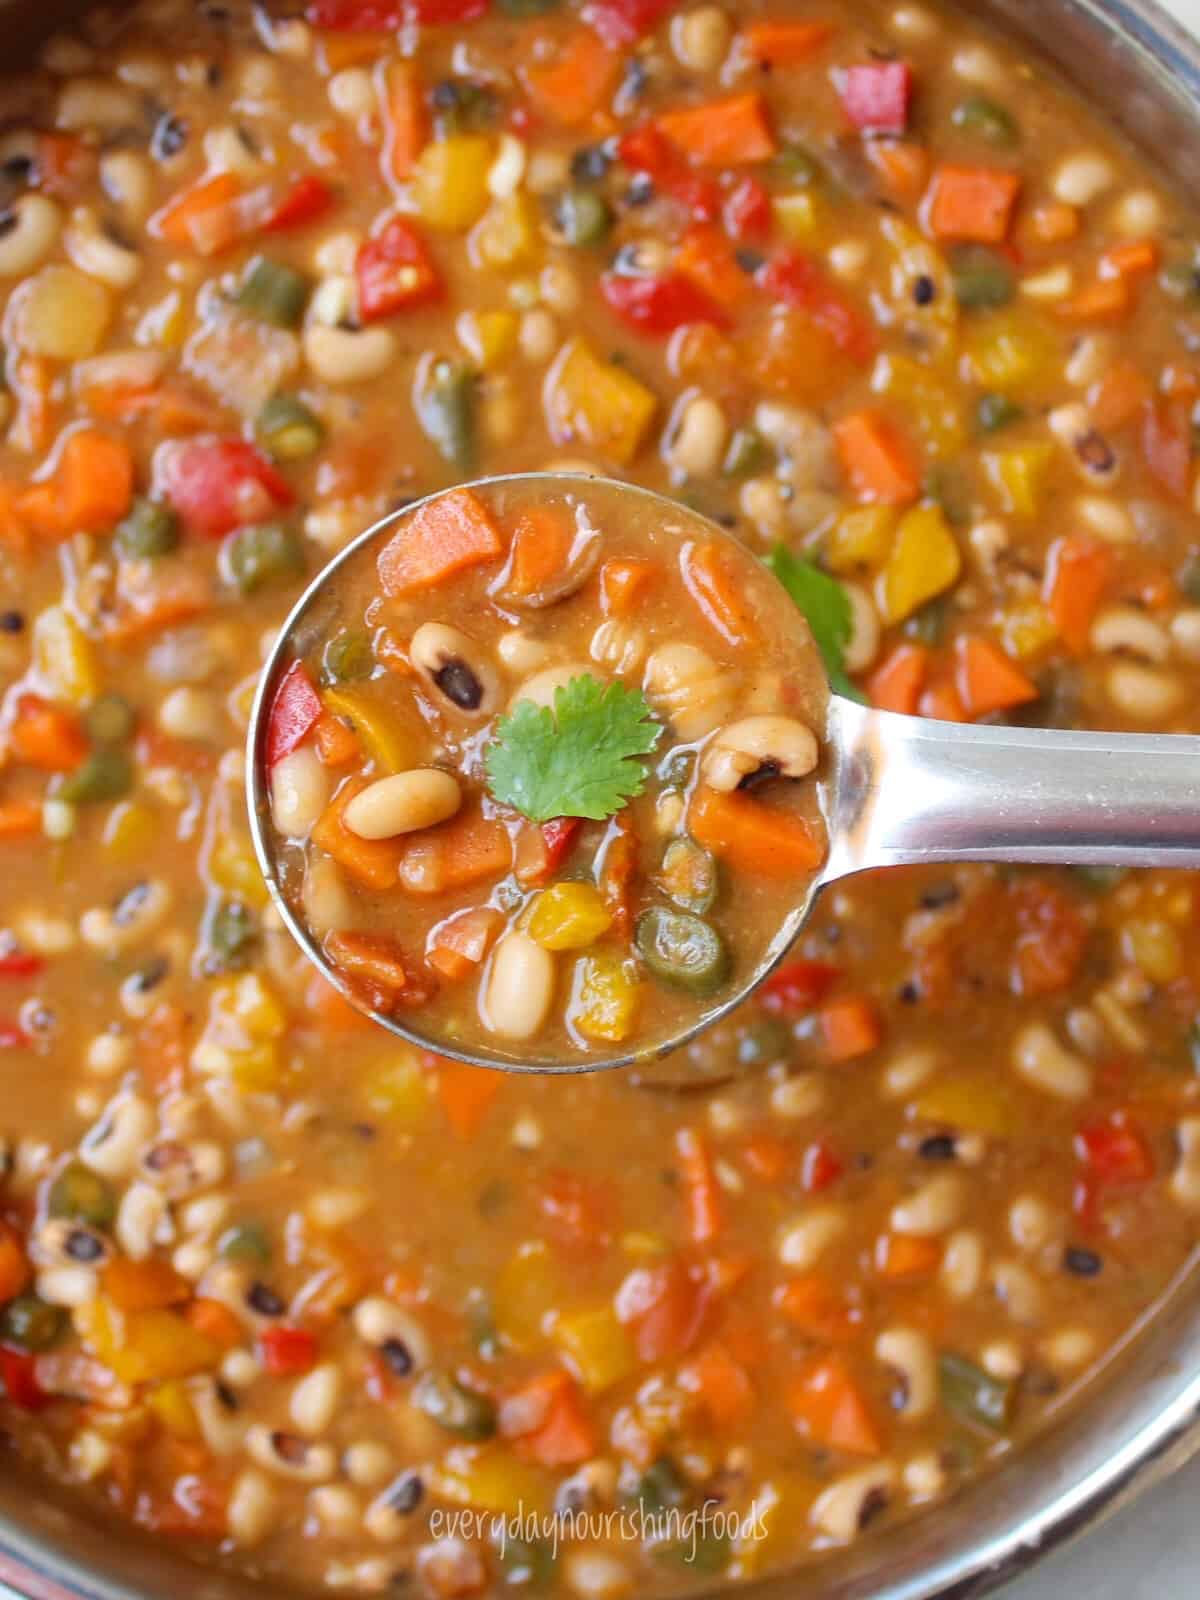 black eyed peas soup in a spoon